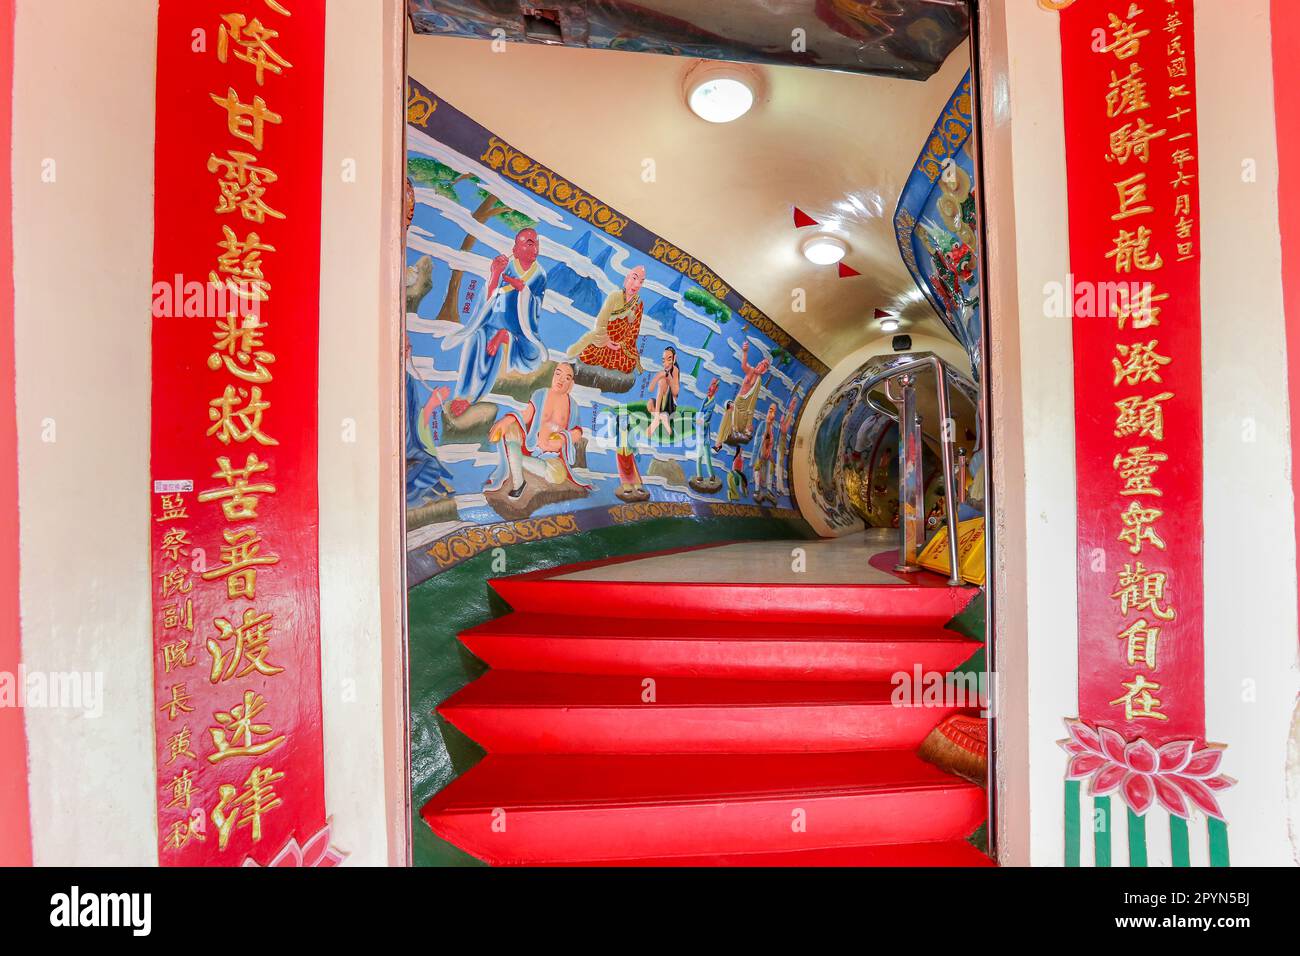 Paintings inside the Spring & Autumn Pavilions (春秋閣), Lotus Lake, Kaohsiung city, Taiwan, Chi Ming palace, Chinese style Daoist (Taoist) temple Pagoda Stock Photo